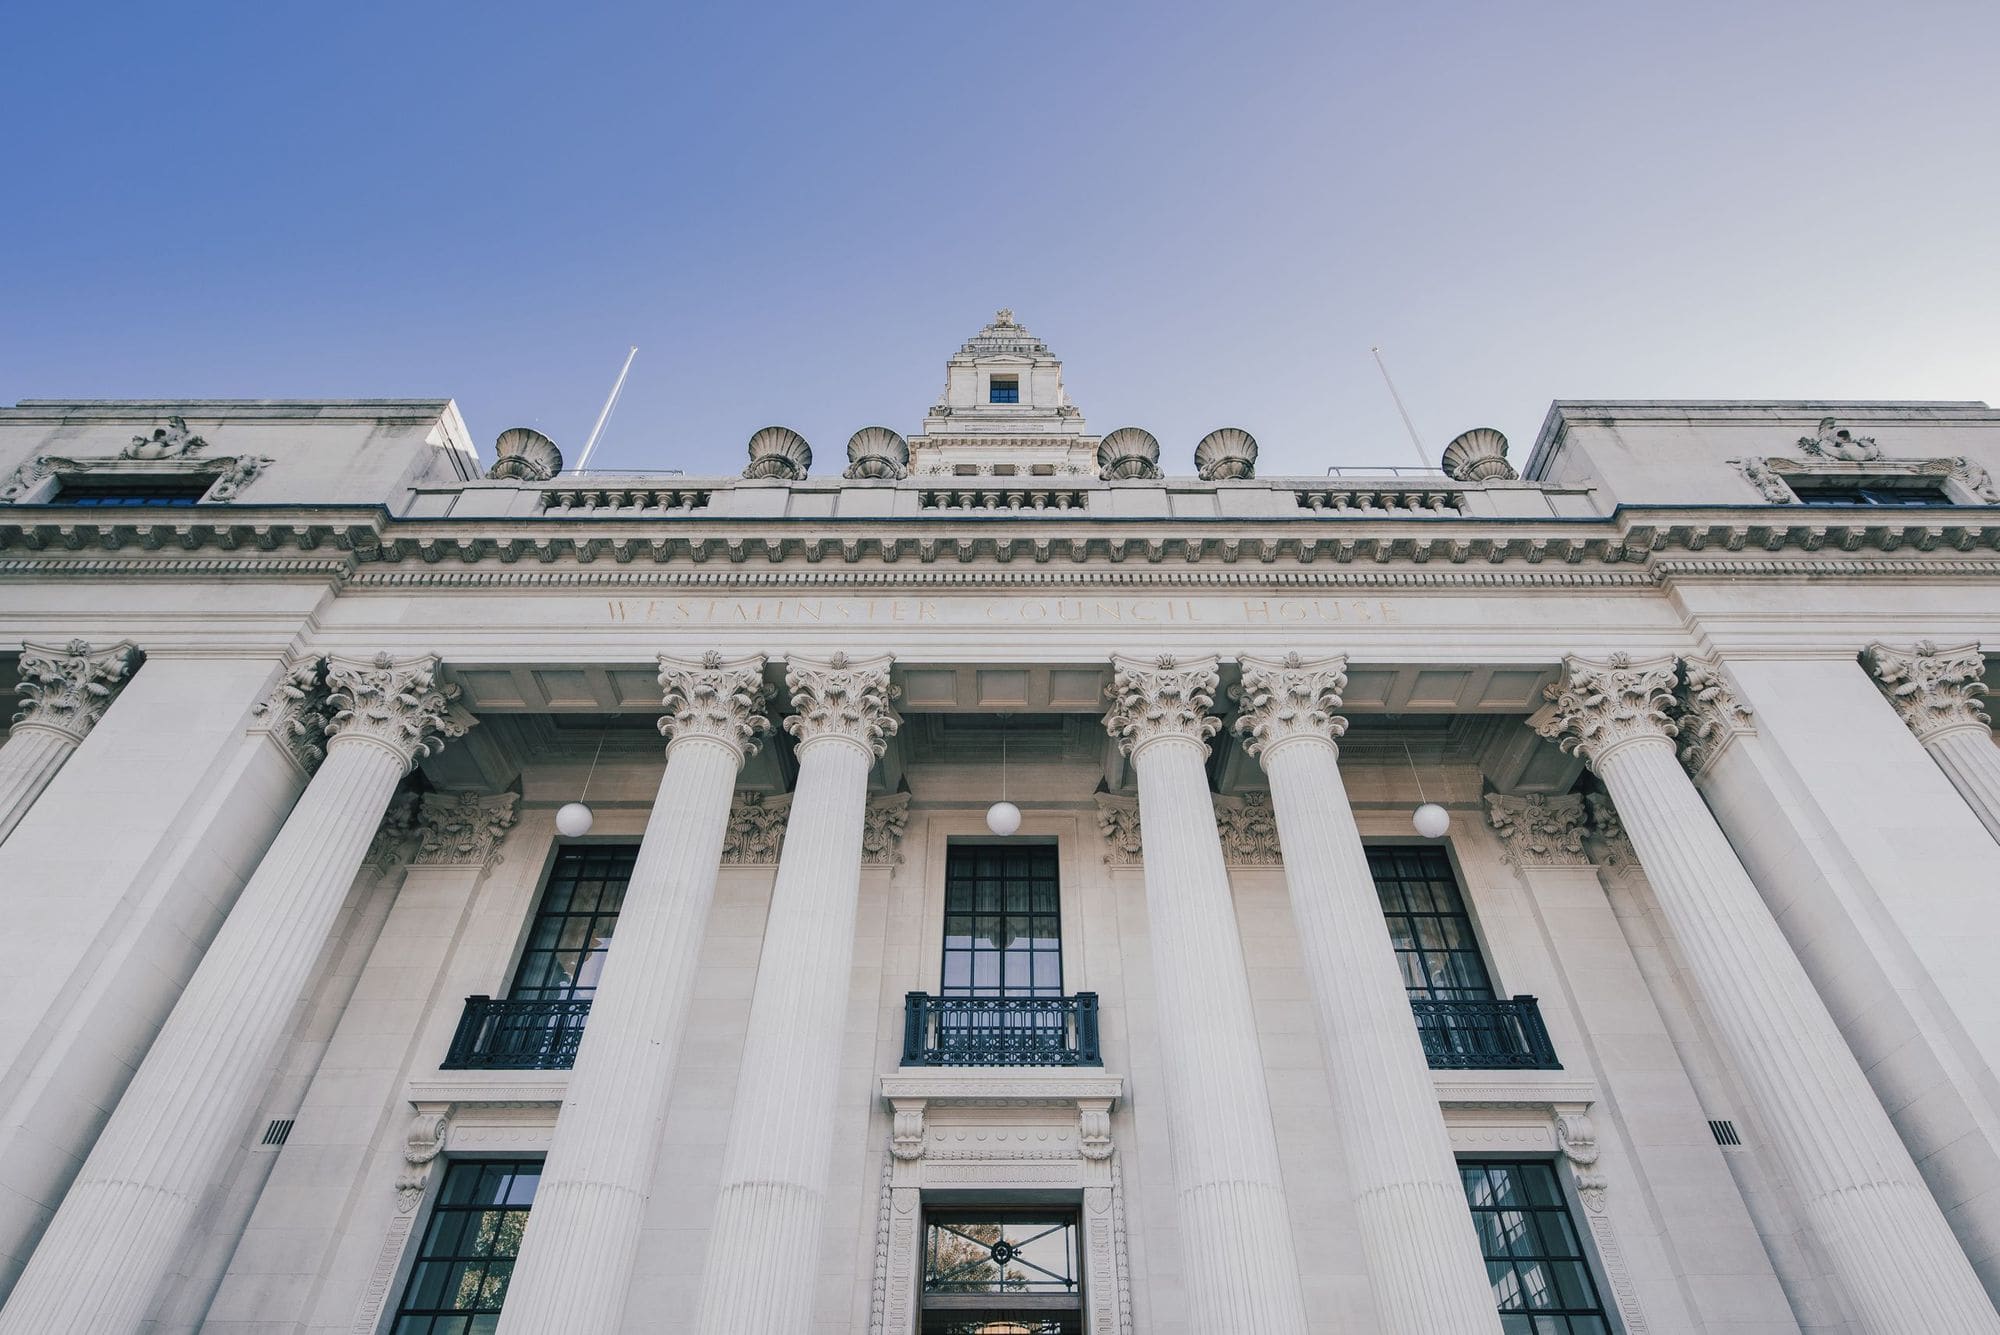 The best London register offices for your ceremony -  the Old Marylebone Town Hall